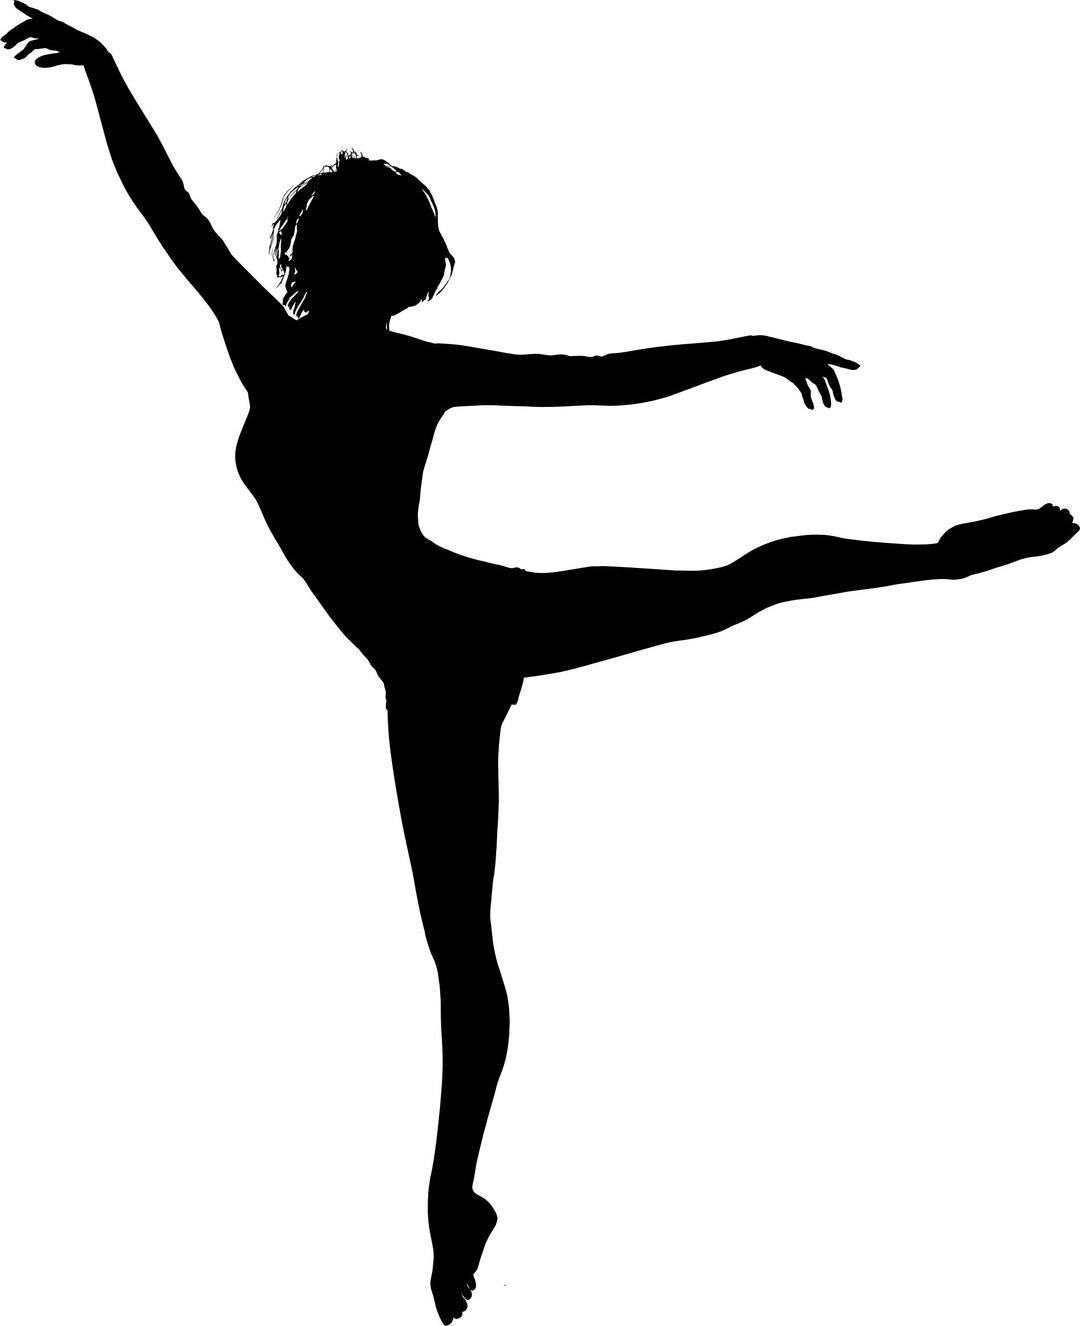 Lithe Dancing Woman Silhouette png transparent